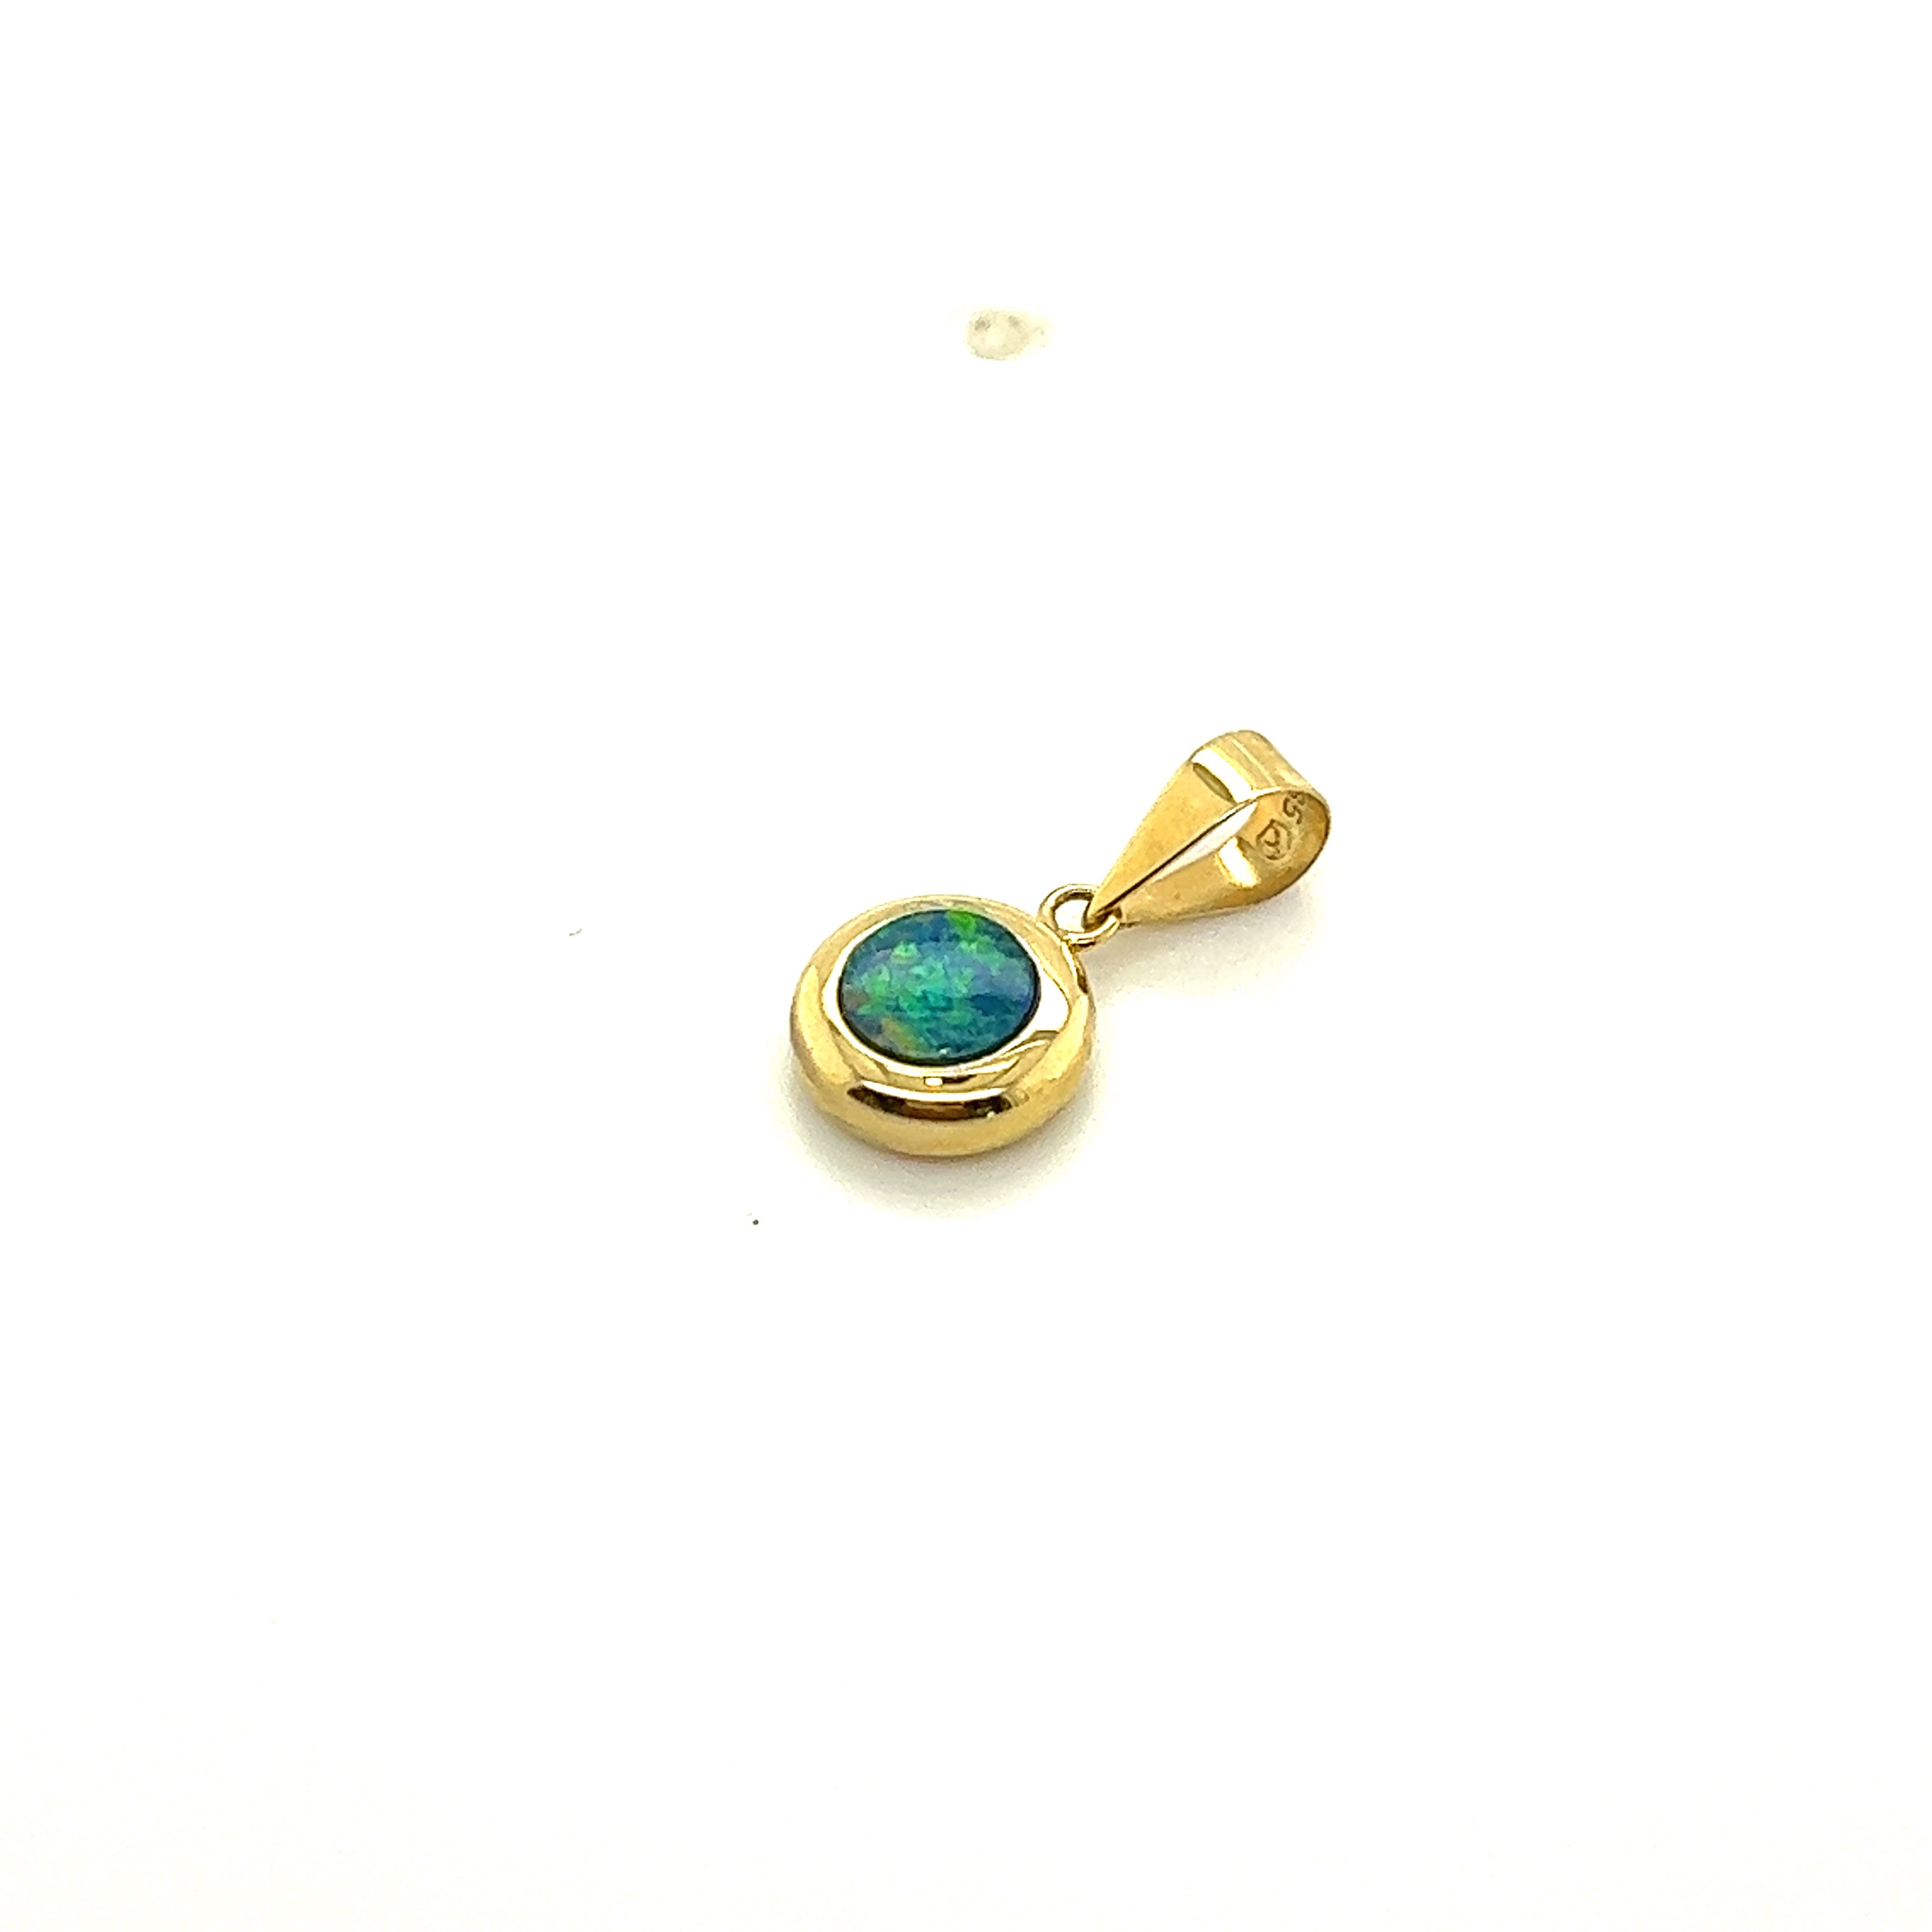 14ct yellow gold doublet opal pendant.